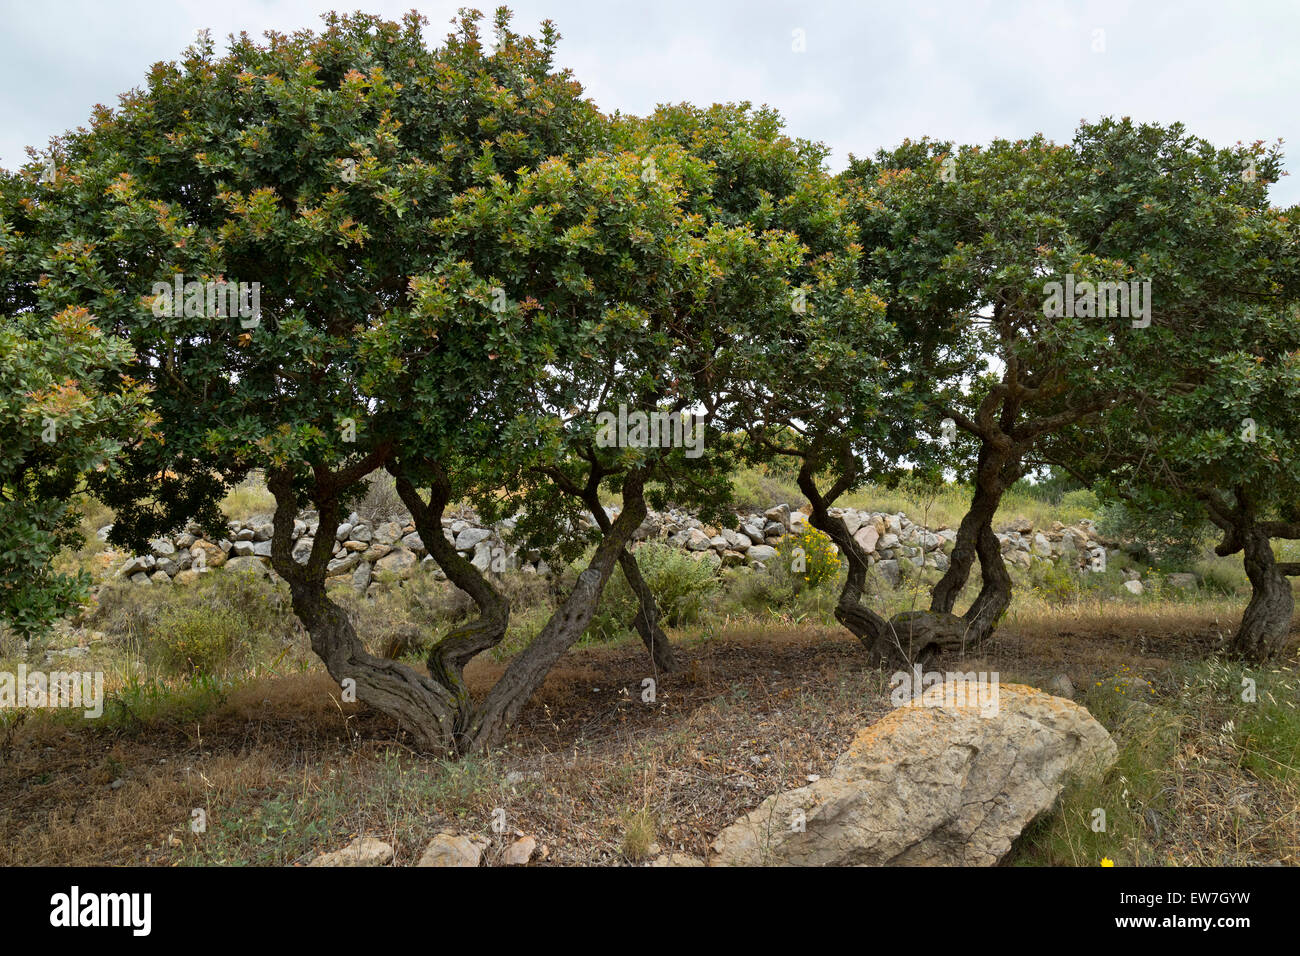 Mastic tree or Pistacia lentiscus growing on the island of Chios; Greece Stock Photo